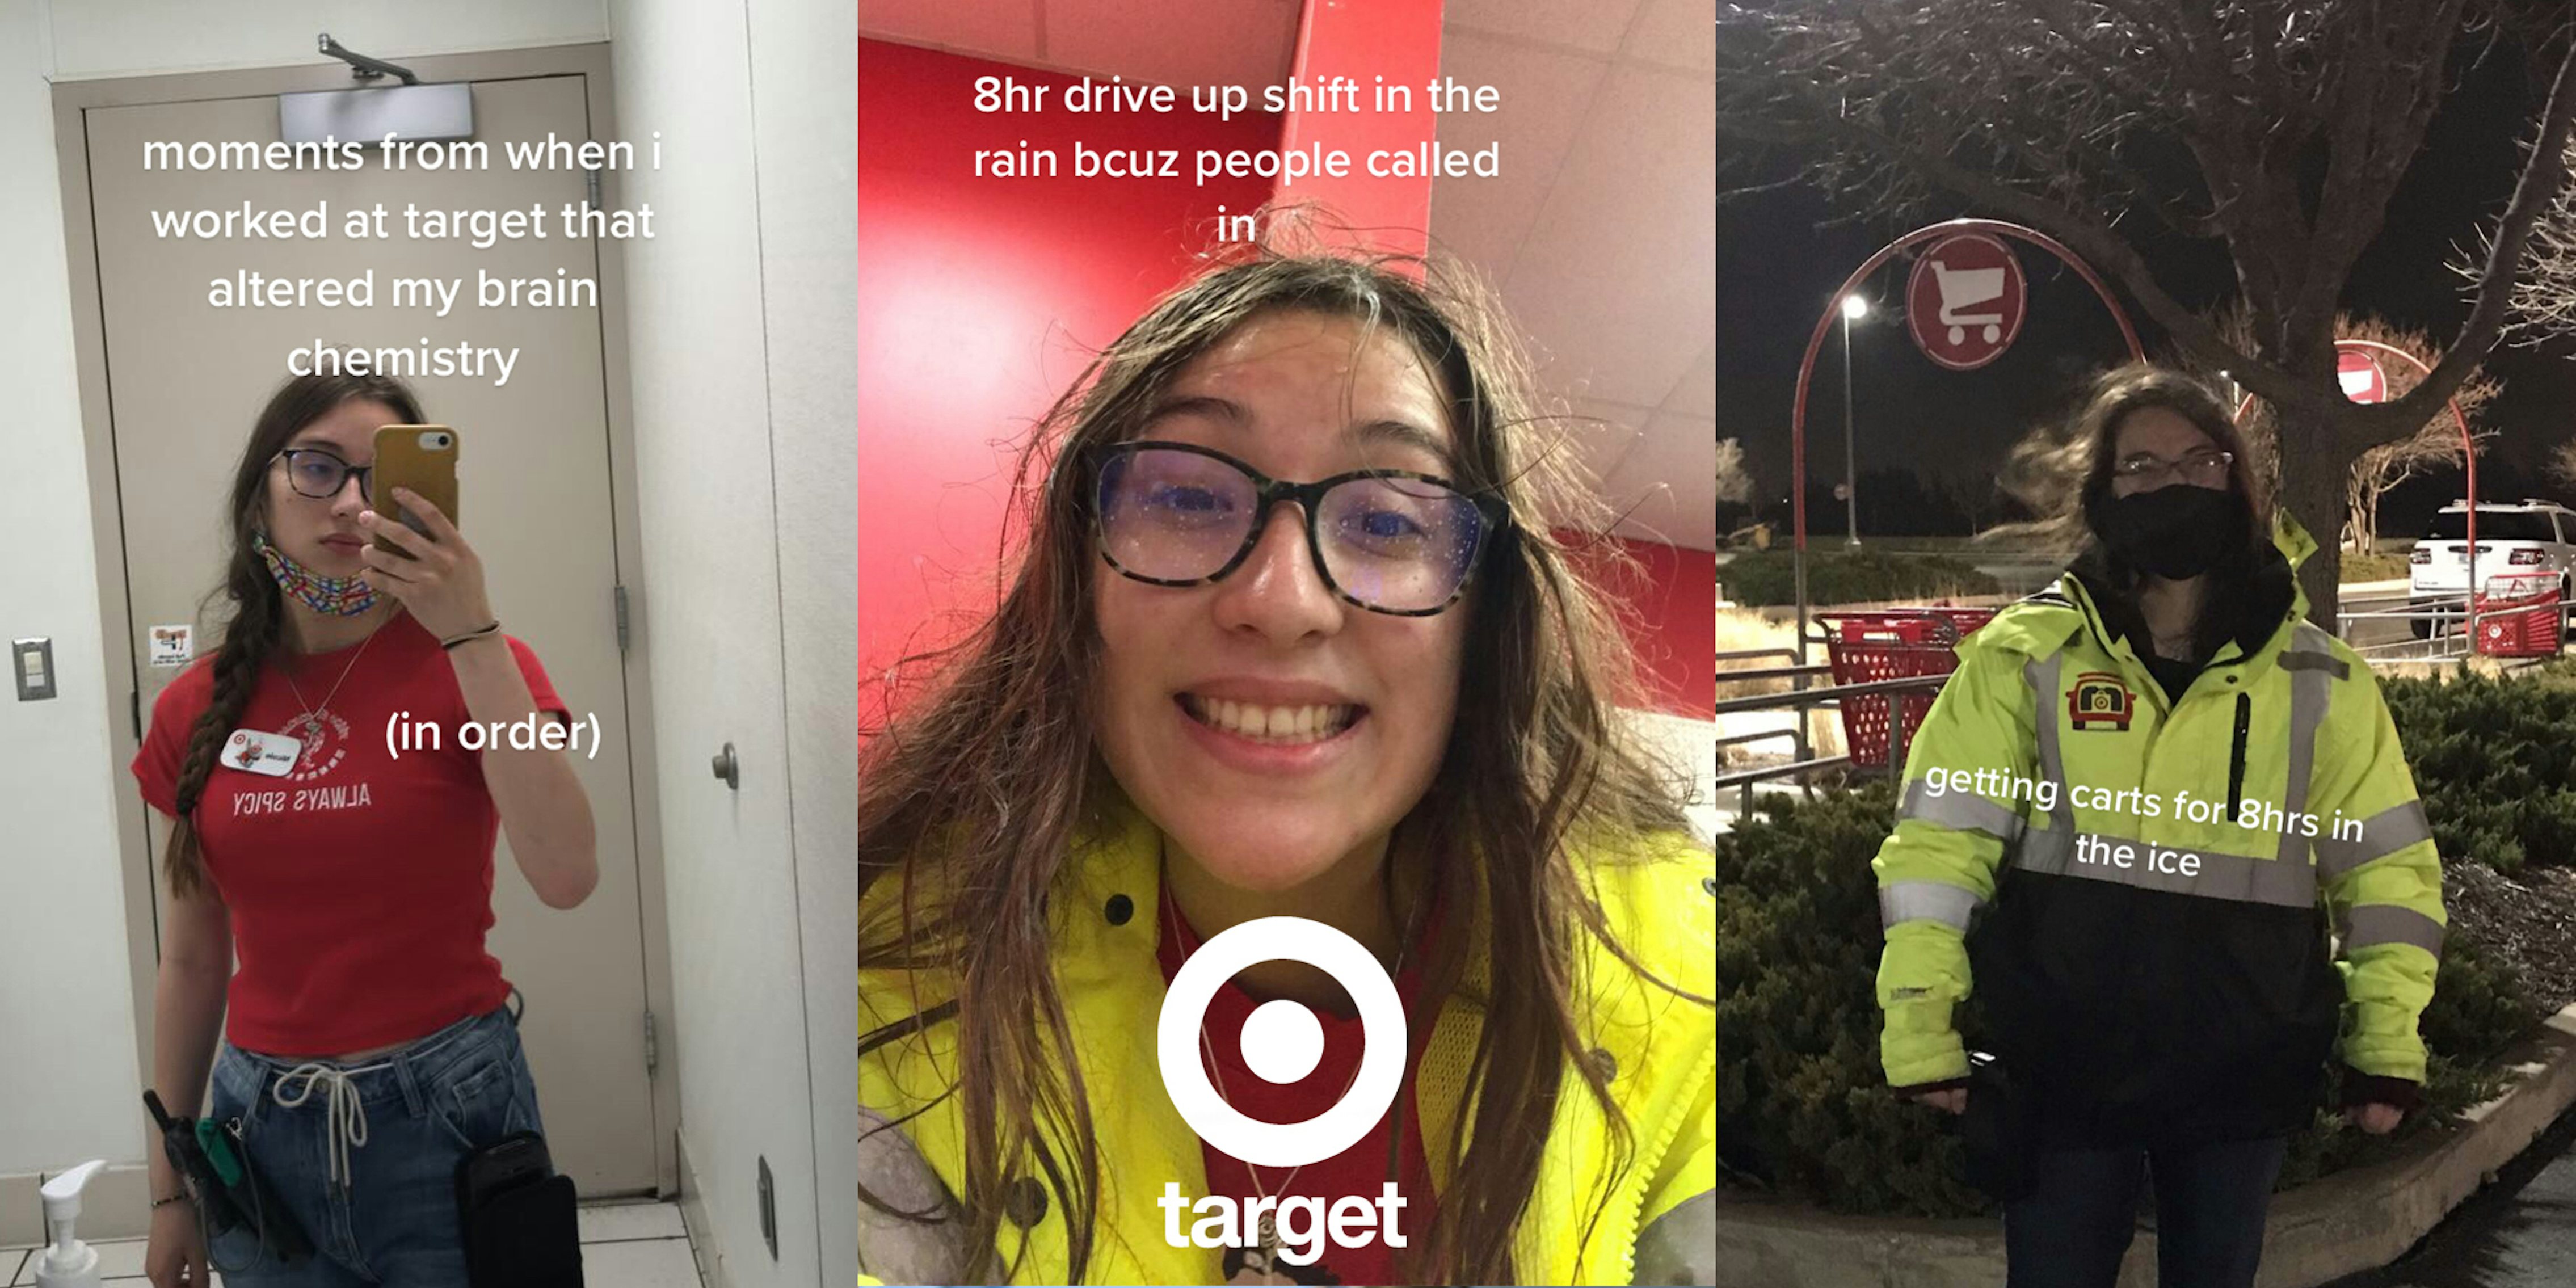 Target employee taking selfie caption 'moments from when i worked at target that altered my brain chemistry (in order)' (l) Target employee with Target logo white caption '8hr drive up shift in the rain bcuz people called in' (c) Target employee outside in parking lot caption 'getting carts for 8hrs in the ice' (r)